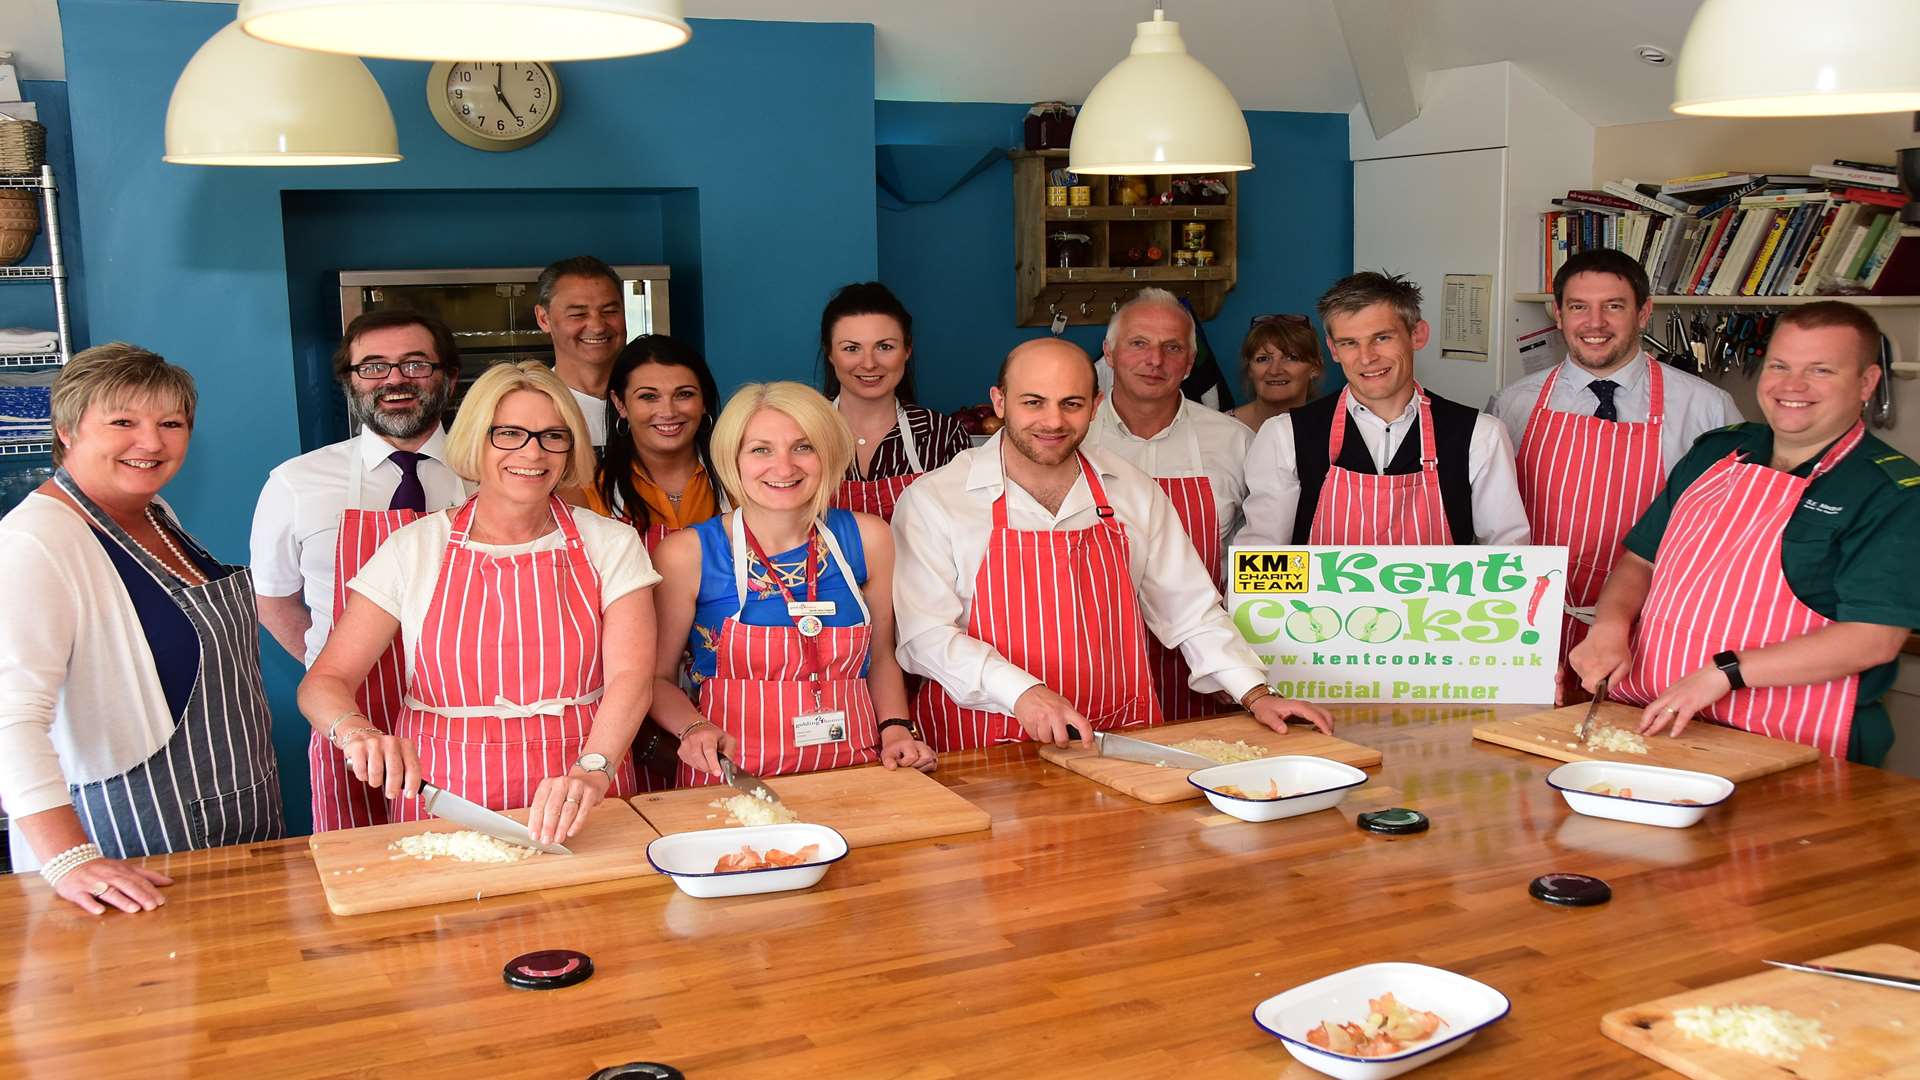 Kent Cooks 2016 key partners showcase their support for the county's official school cookery contest at the Summer Launch event staged at Chequers Kitchen Cookery School on Monday, June 6.